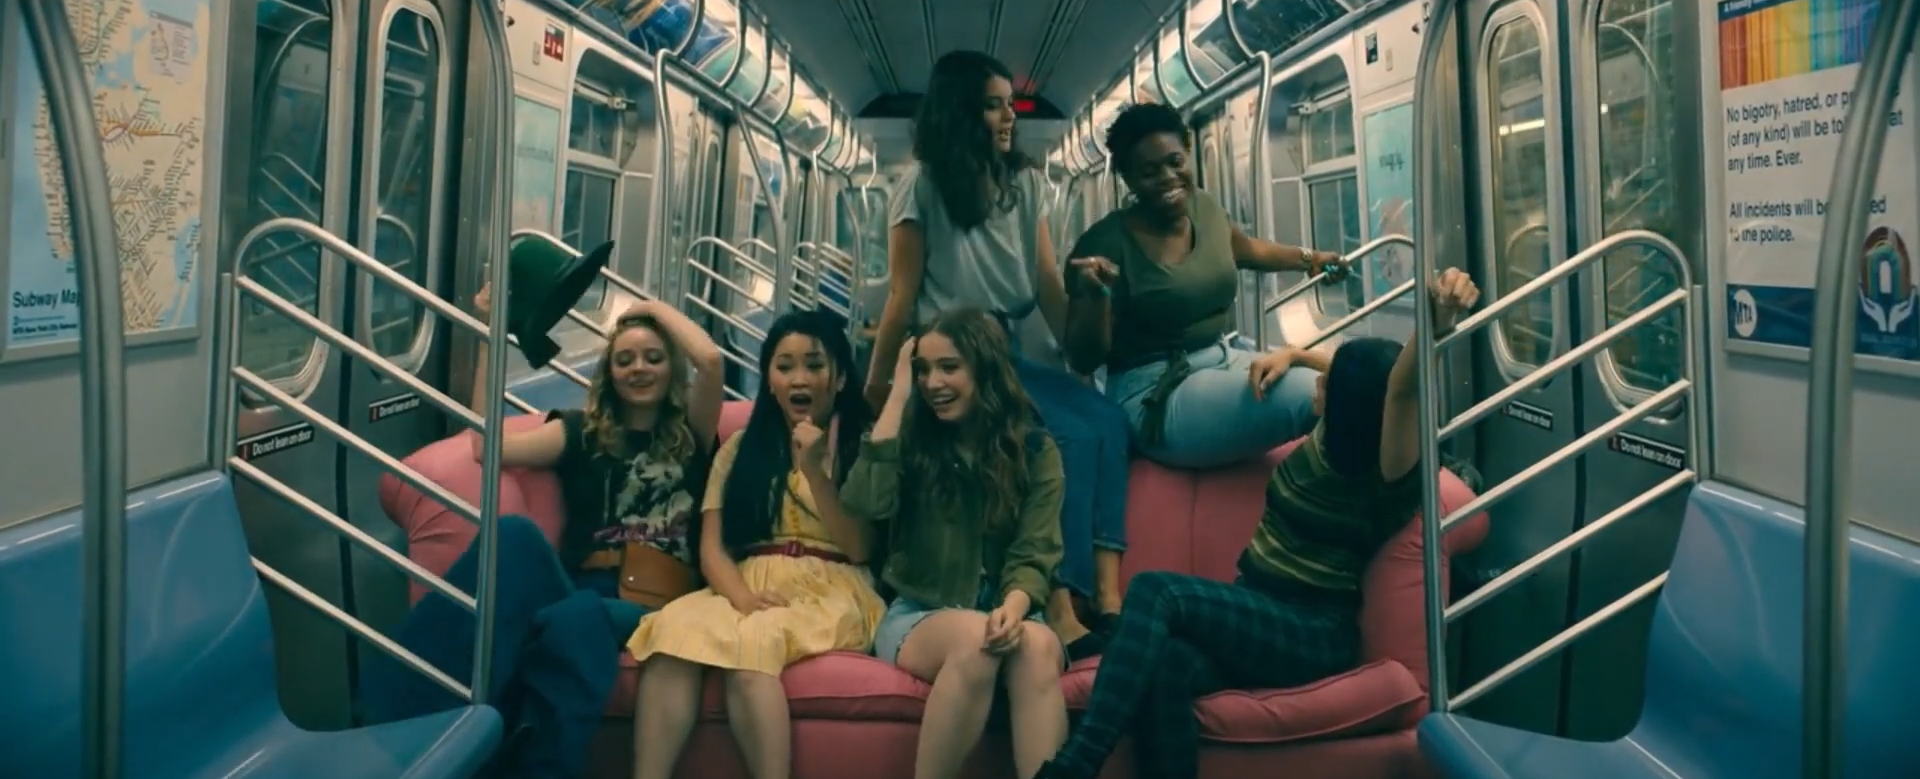 Lara Jean, Gen, Christine, and other friends are on the subway together